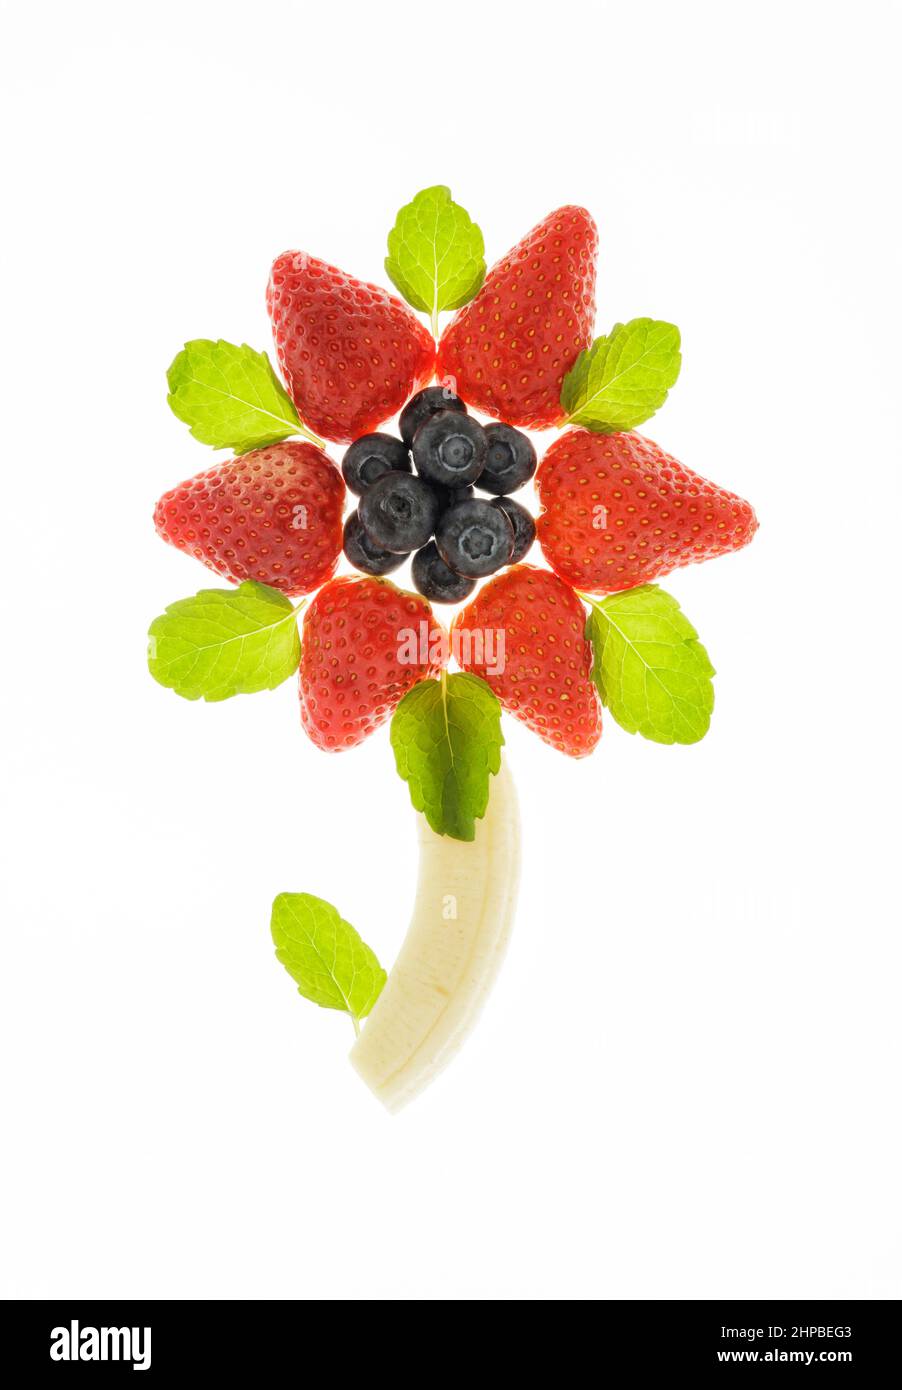 Fresh blueberries ,strawberries and banana arranged in the shape of a flower Stock Photo